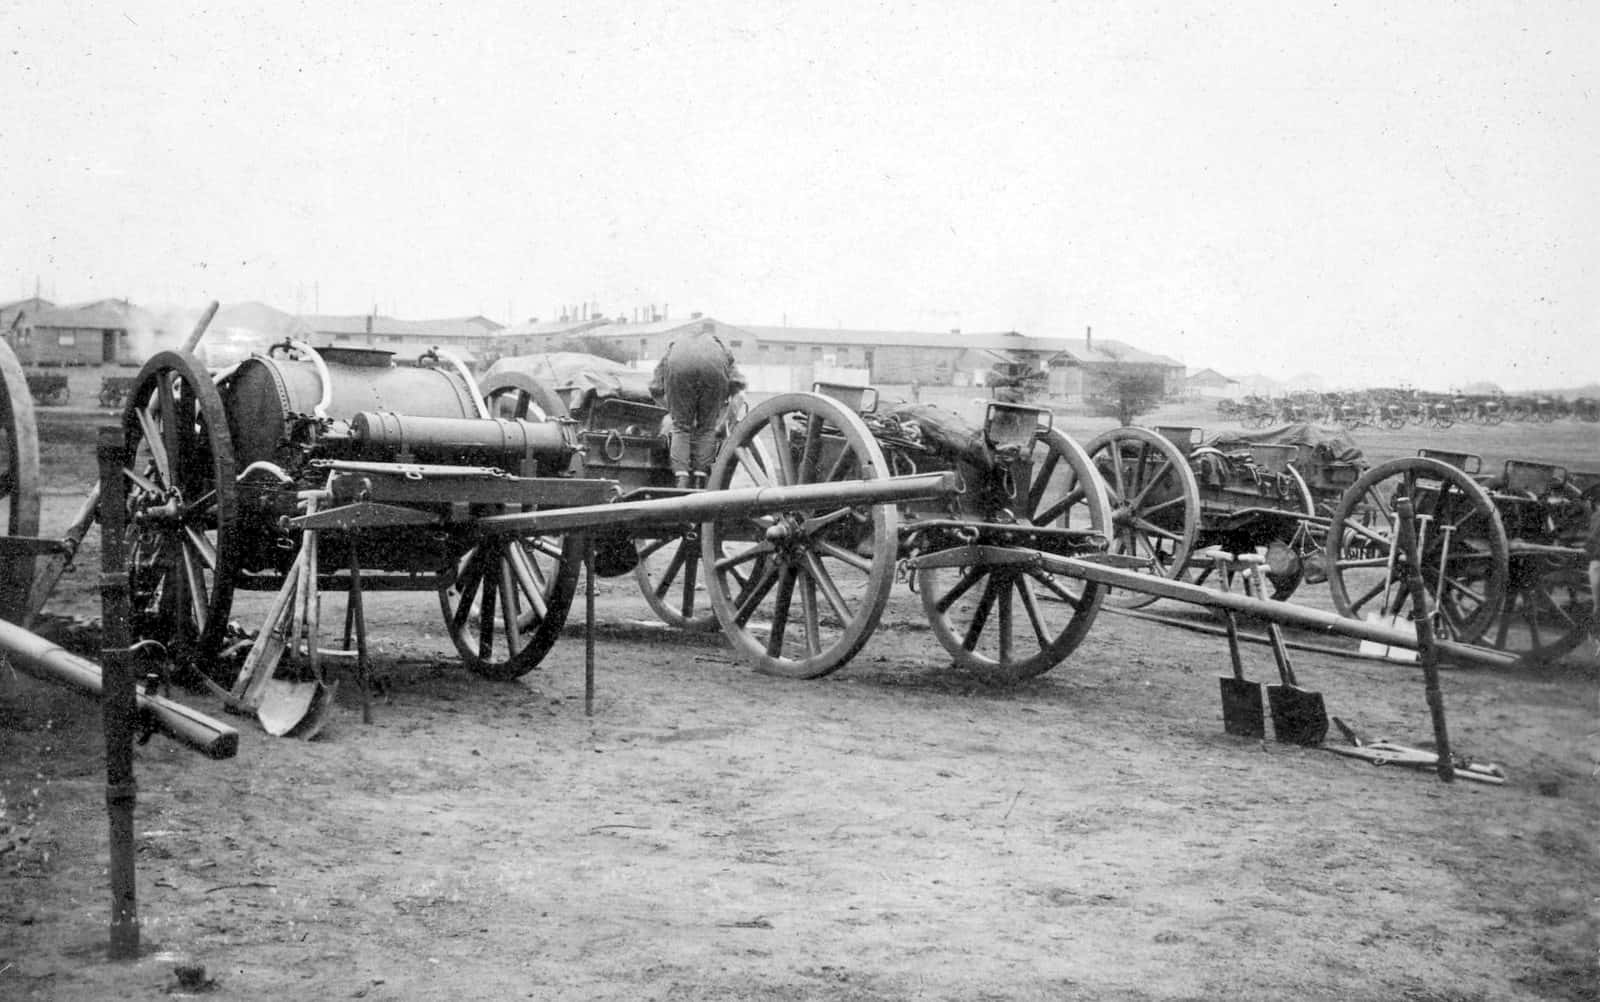 28.-18-Pounders-and-Limbers-Camp-Witley-June-1916